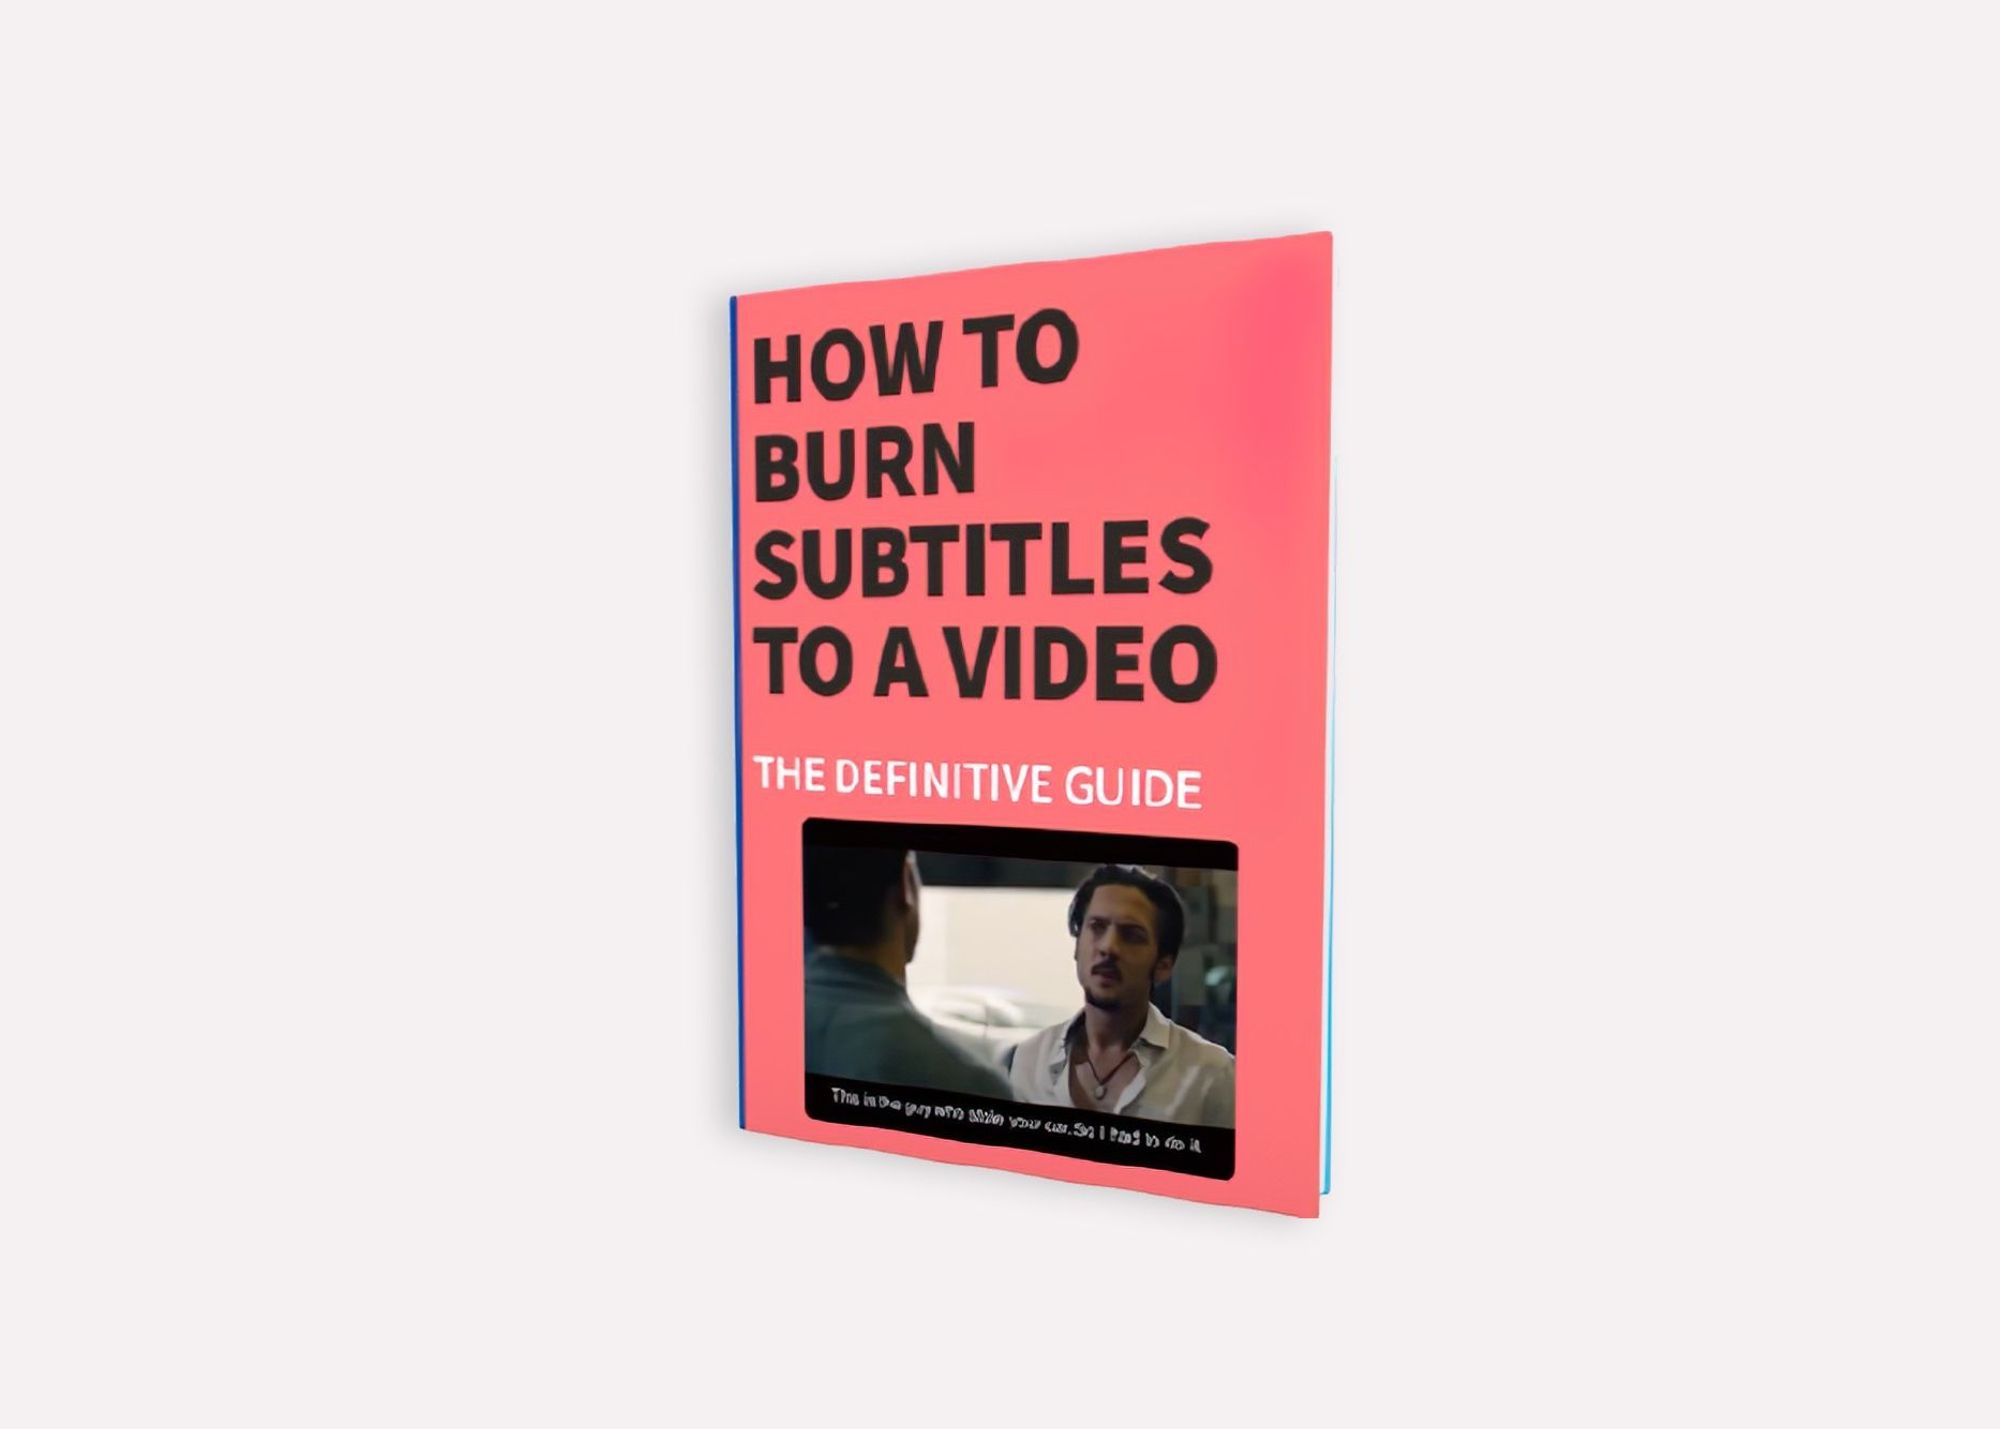 How to Burn Subtitles to a Video? (Definitive Guide 2020)